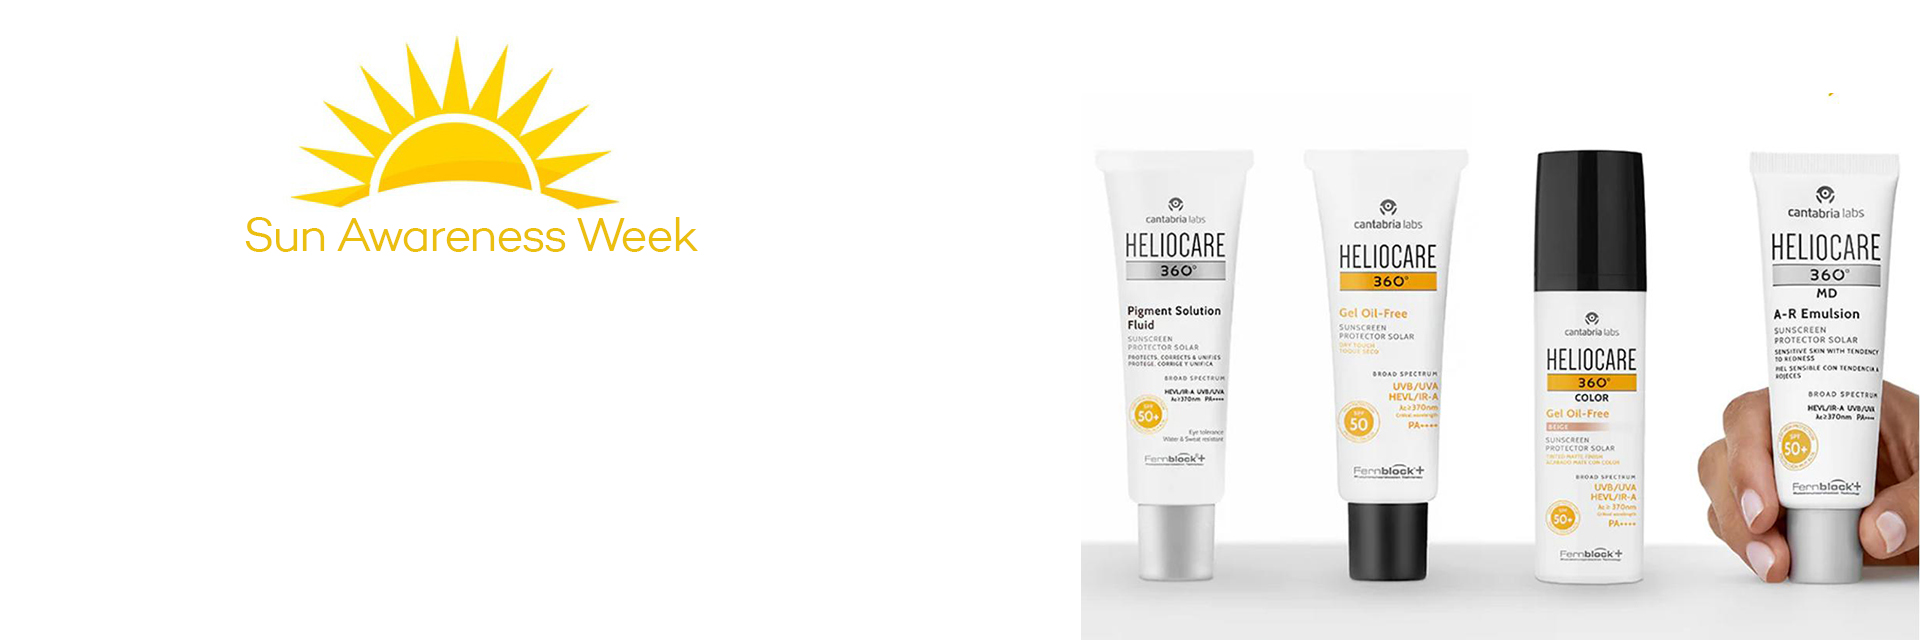 10% OFF 360 HELIOCARE 